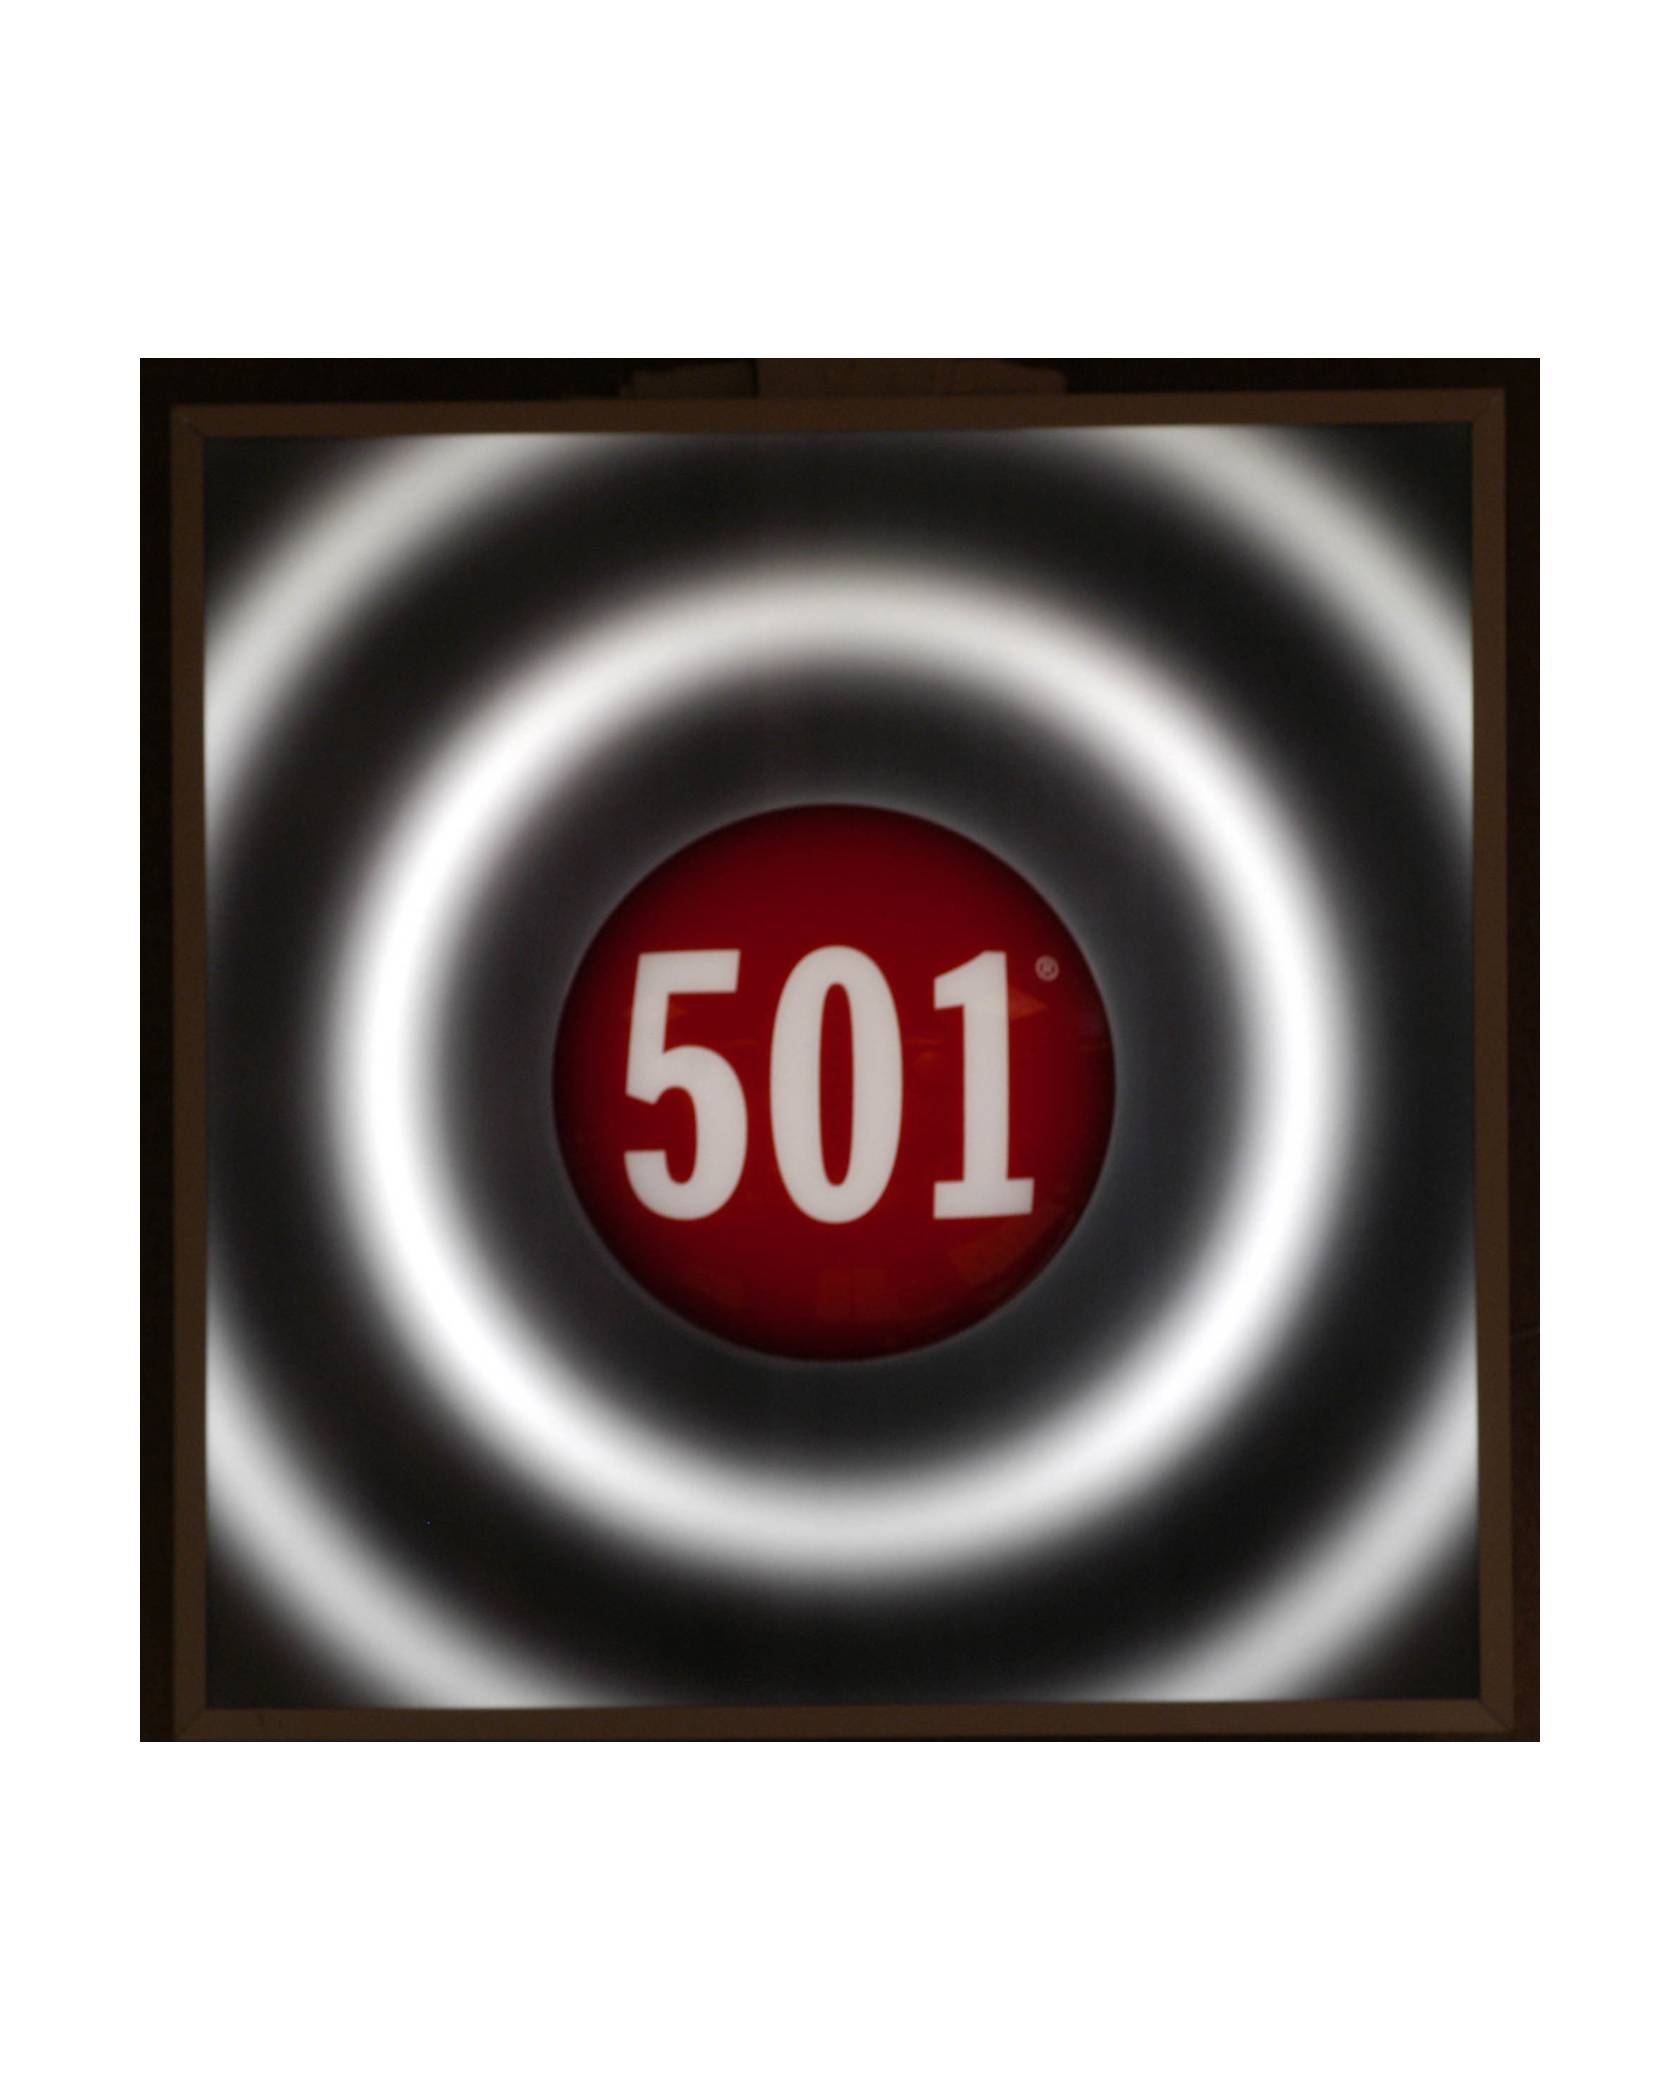 A graphic saying 501